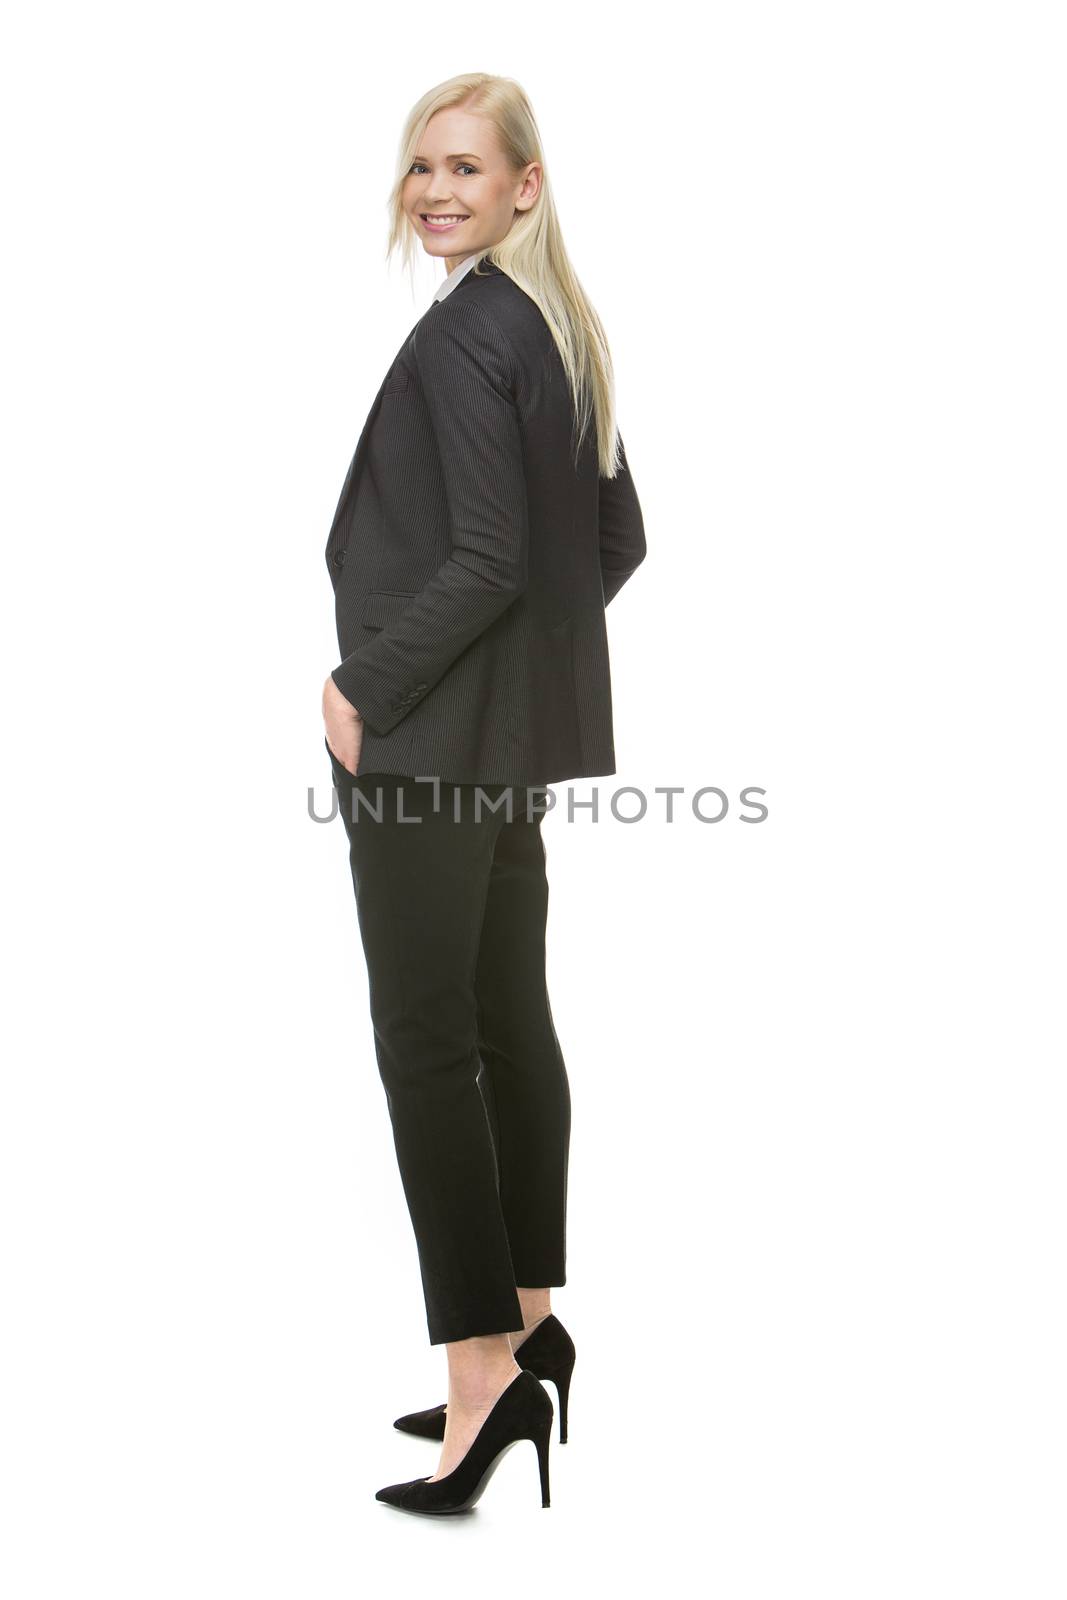 blonde businesswoman turning towards camera, hands in pockets